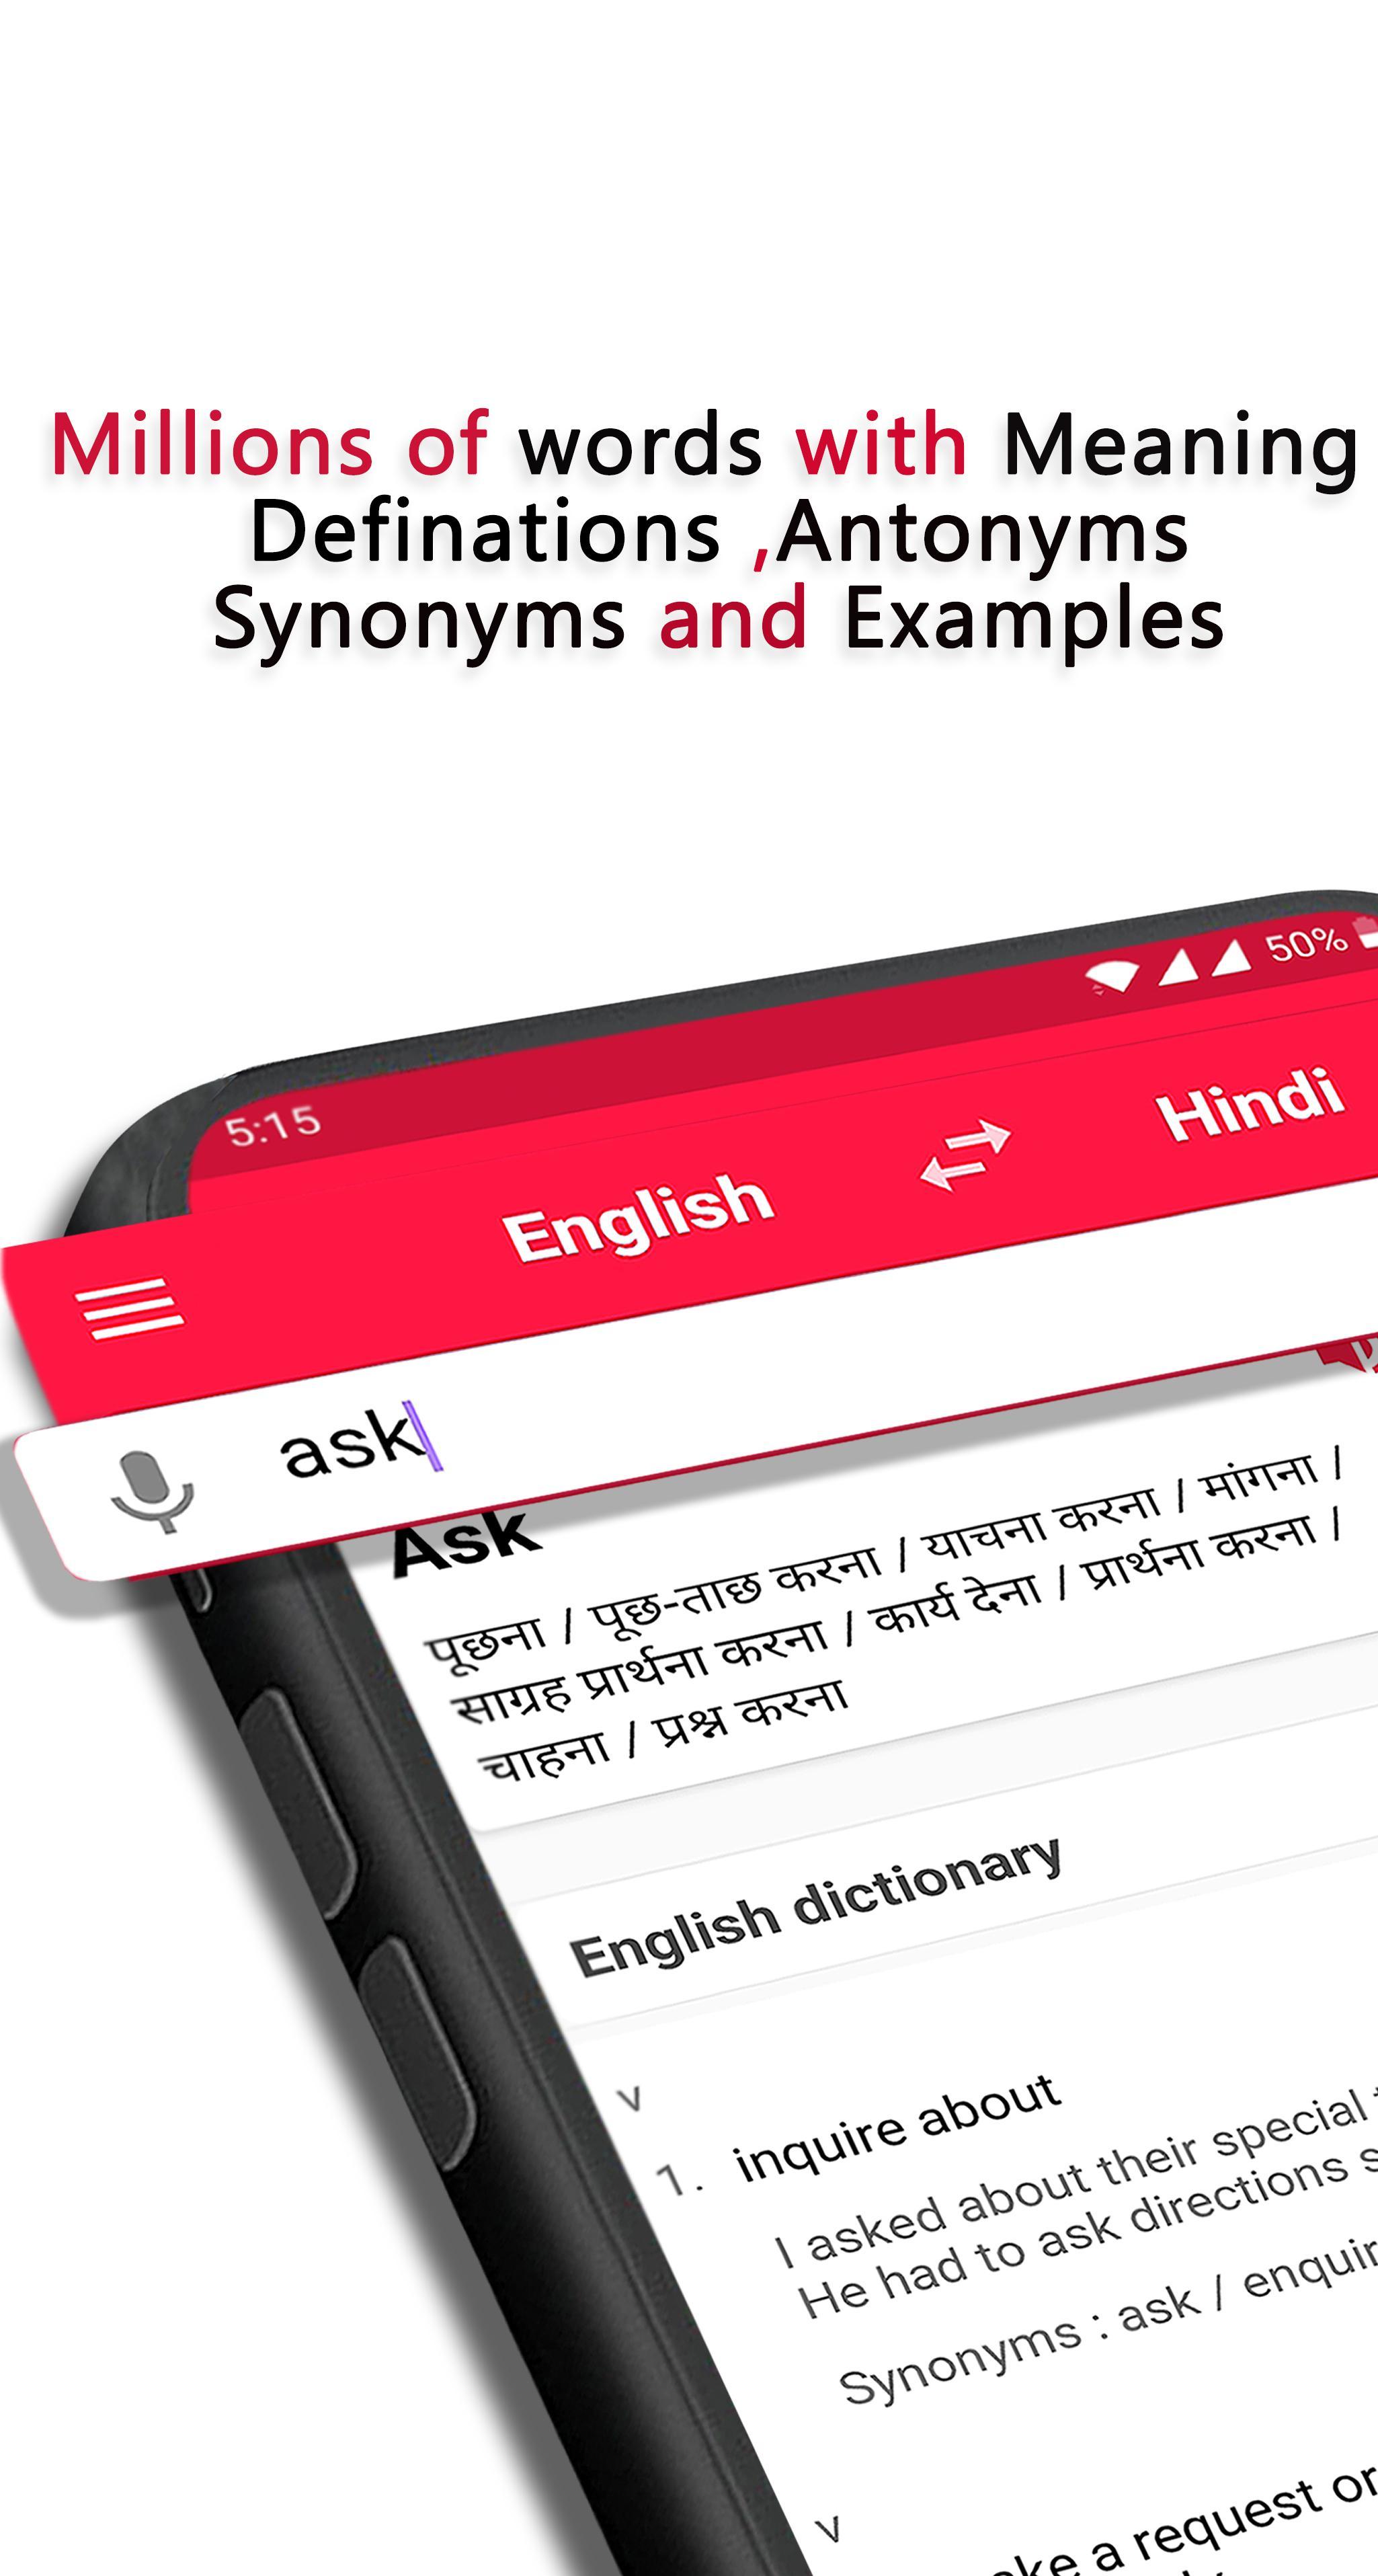 English to hindi dictionary free download for android mobile offline English To Hindi Dictionary Offline For Android Apk Download